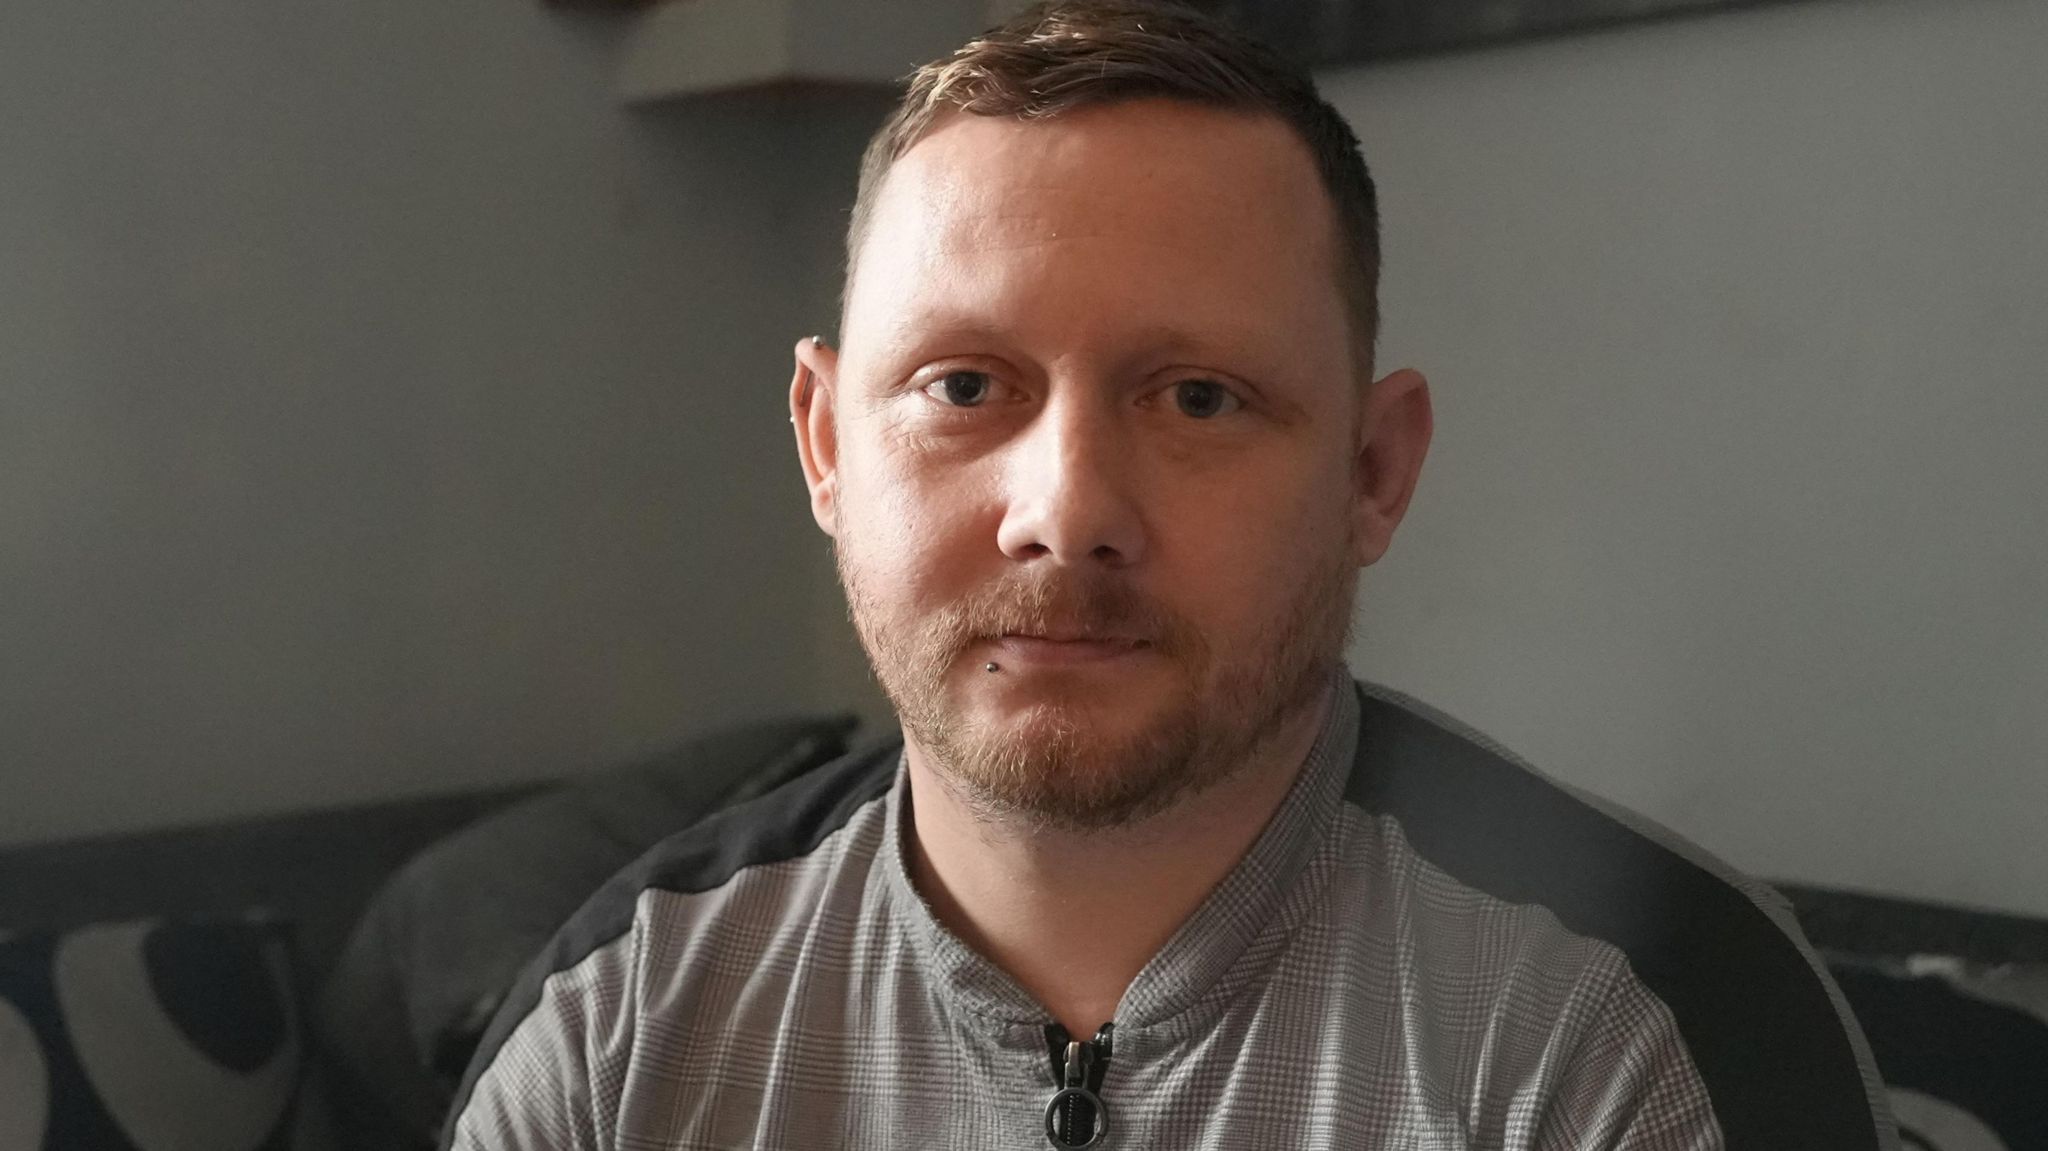 Gaz has short dark hair and a short beard. He is wearing a grey zip up top and is sitting on a sofa, looking into the camera.